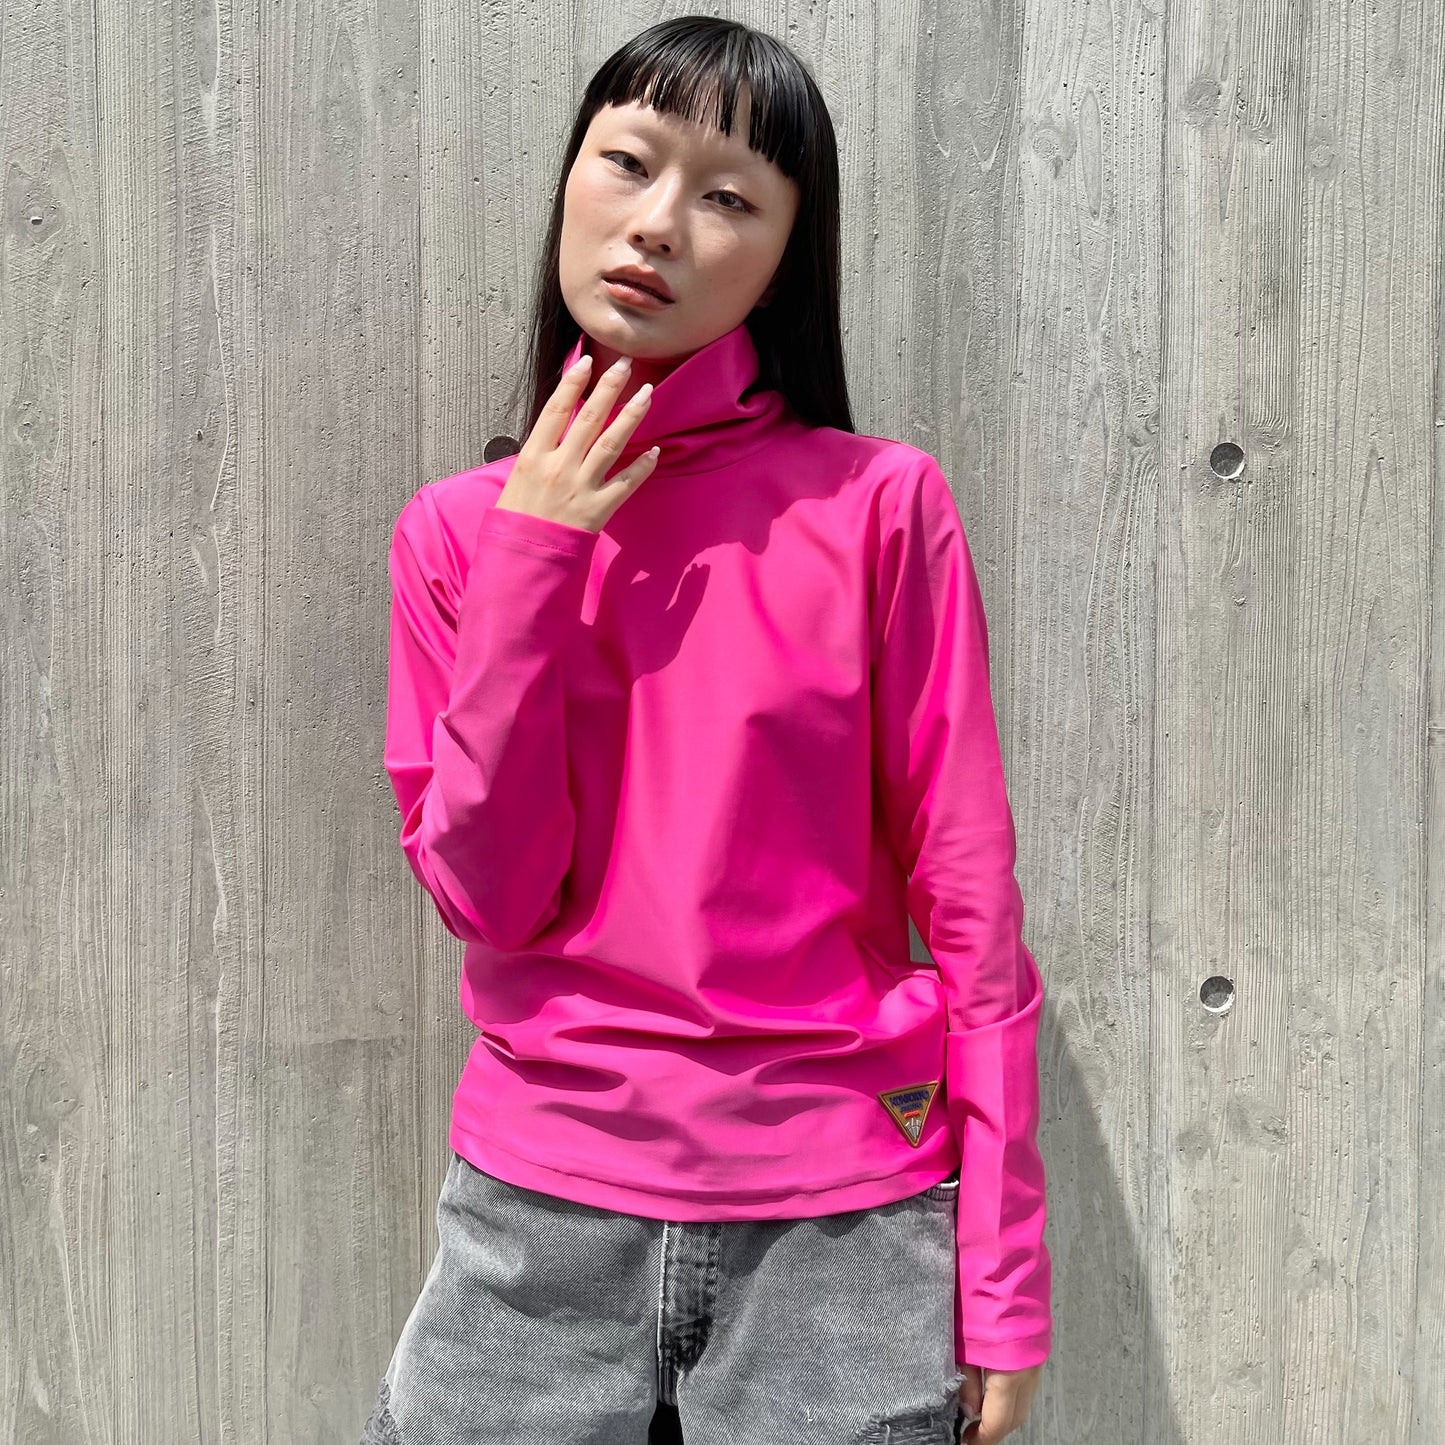 NON TOKYO / STRETCH HI-NECK CUT AND SEWN / PINK / ストレッチ